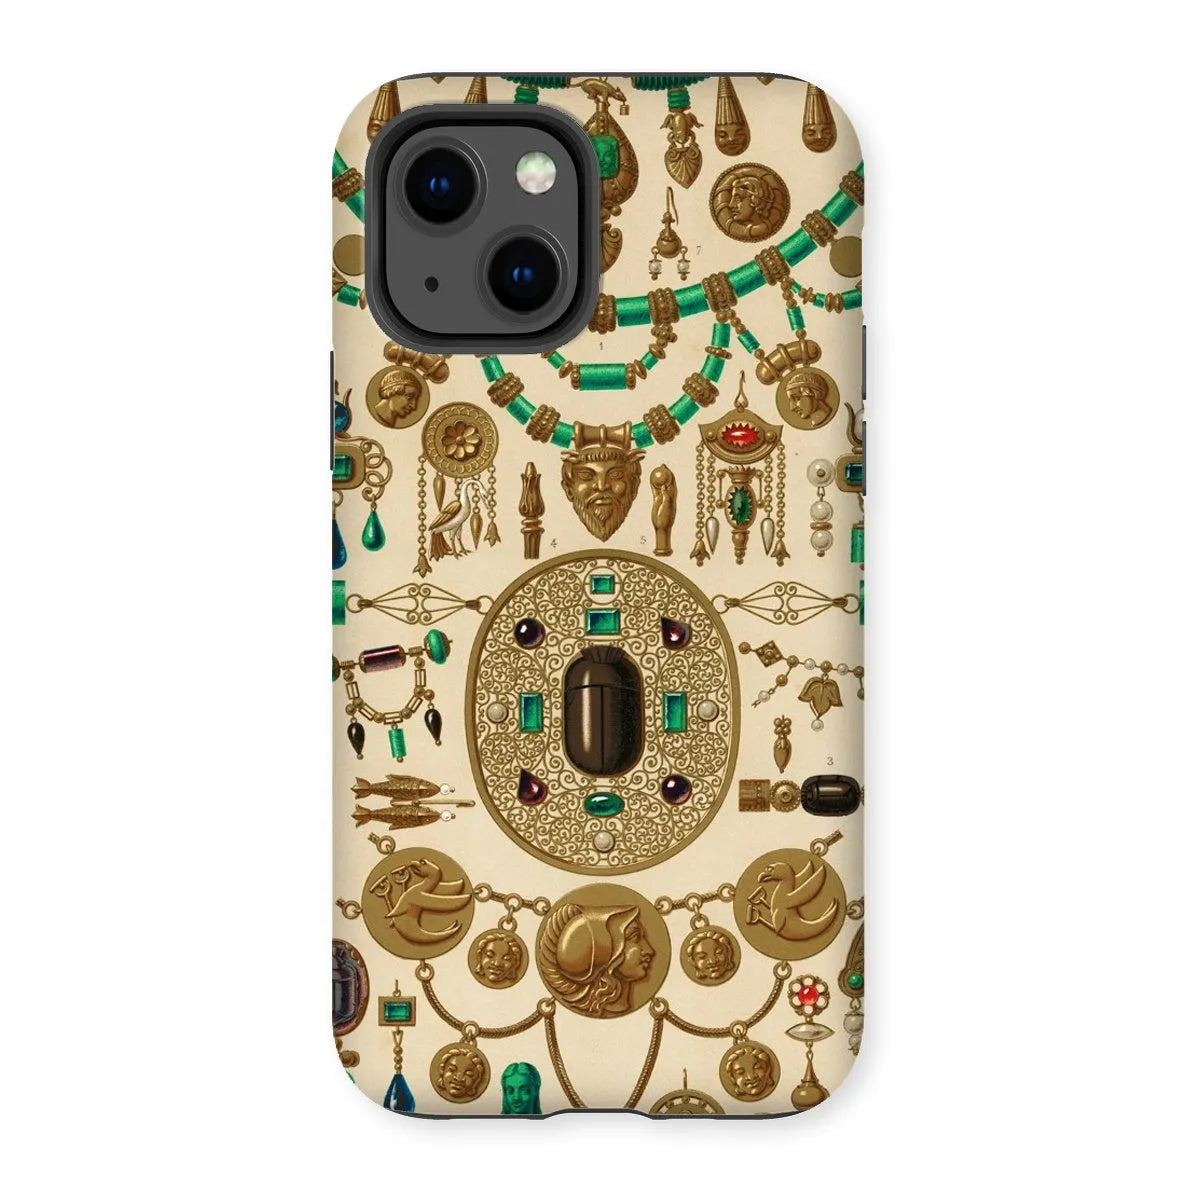 Etruscan Jewelry By Auguste Racinet Art Phone Case - Iphone 13 / Matte - Mobile Phone Cases - Aesthetic Art